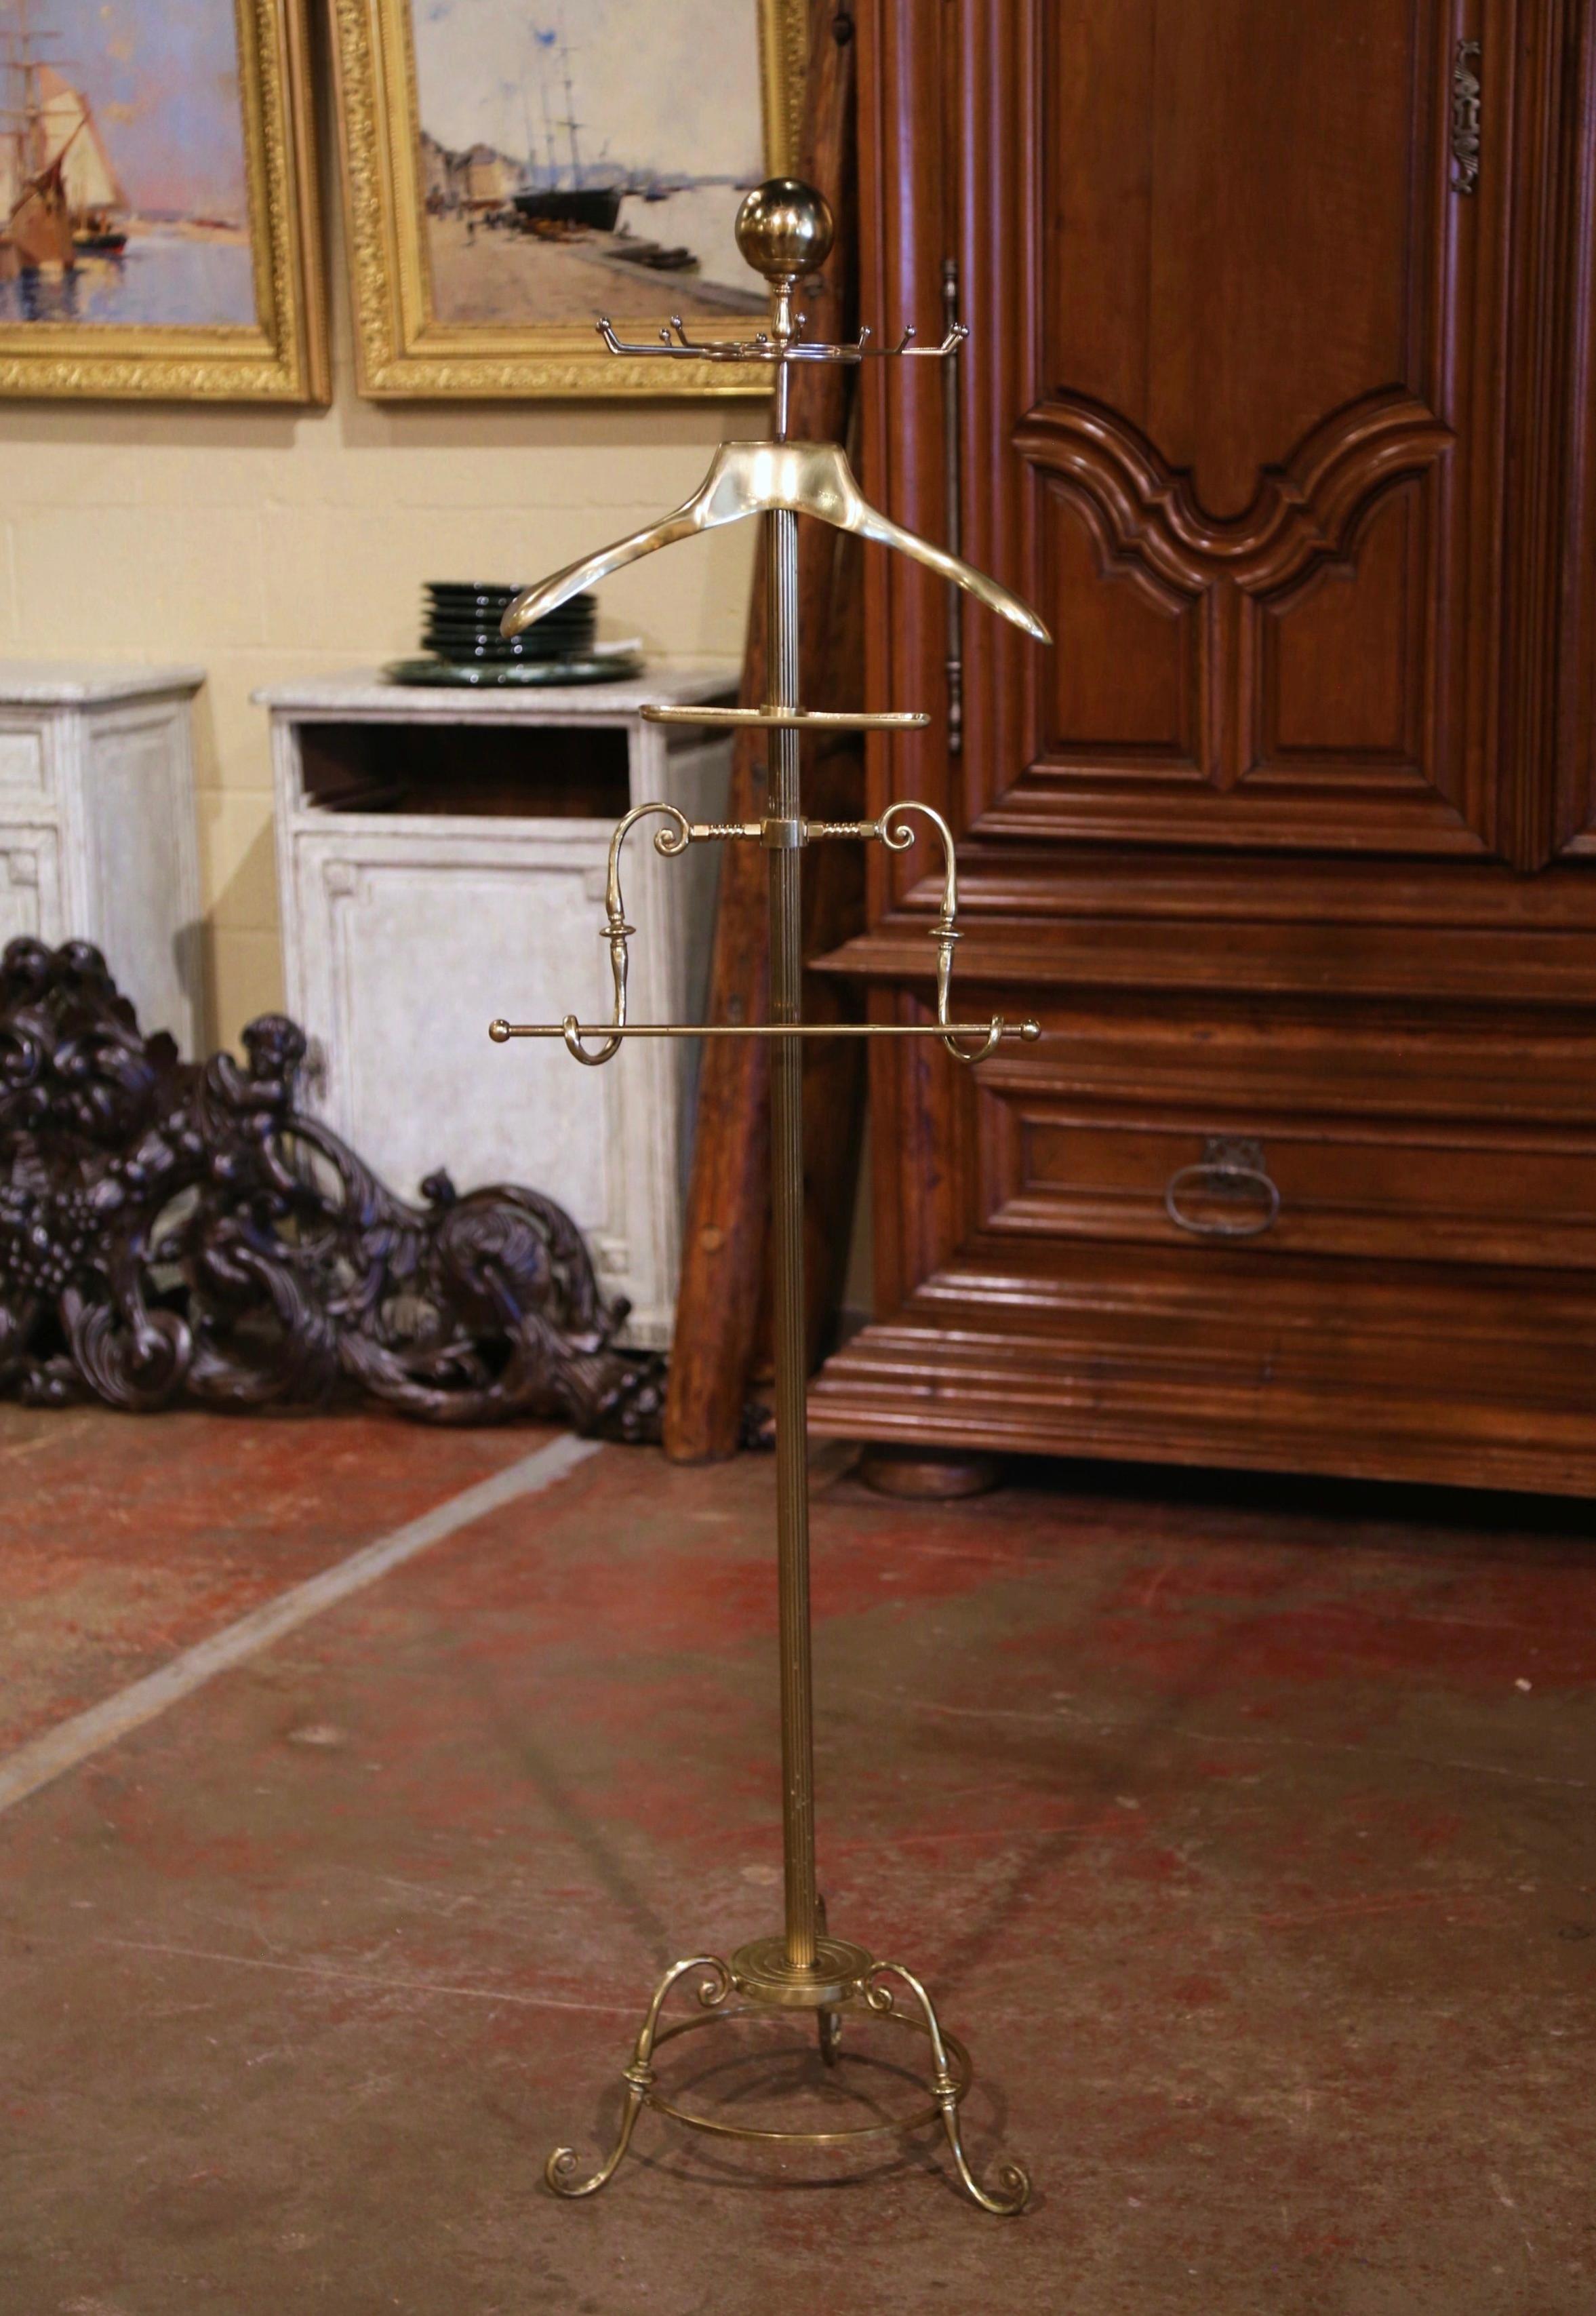 Hand-Crafted Early 20th Century French Gilt Brass Jacket Hanger Bathroom Coat Stand For Sale